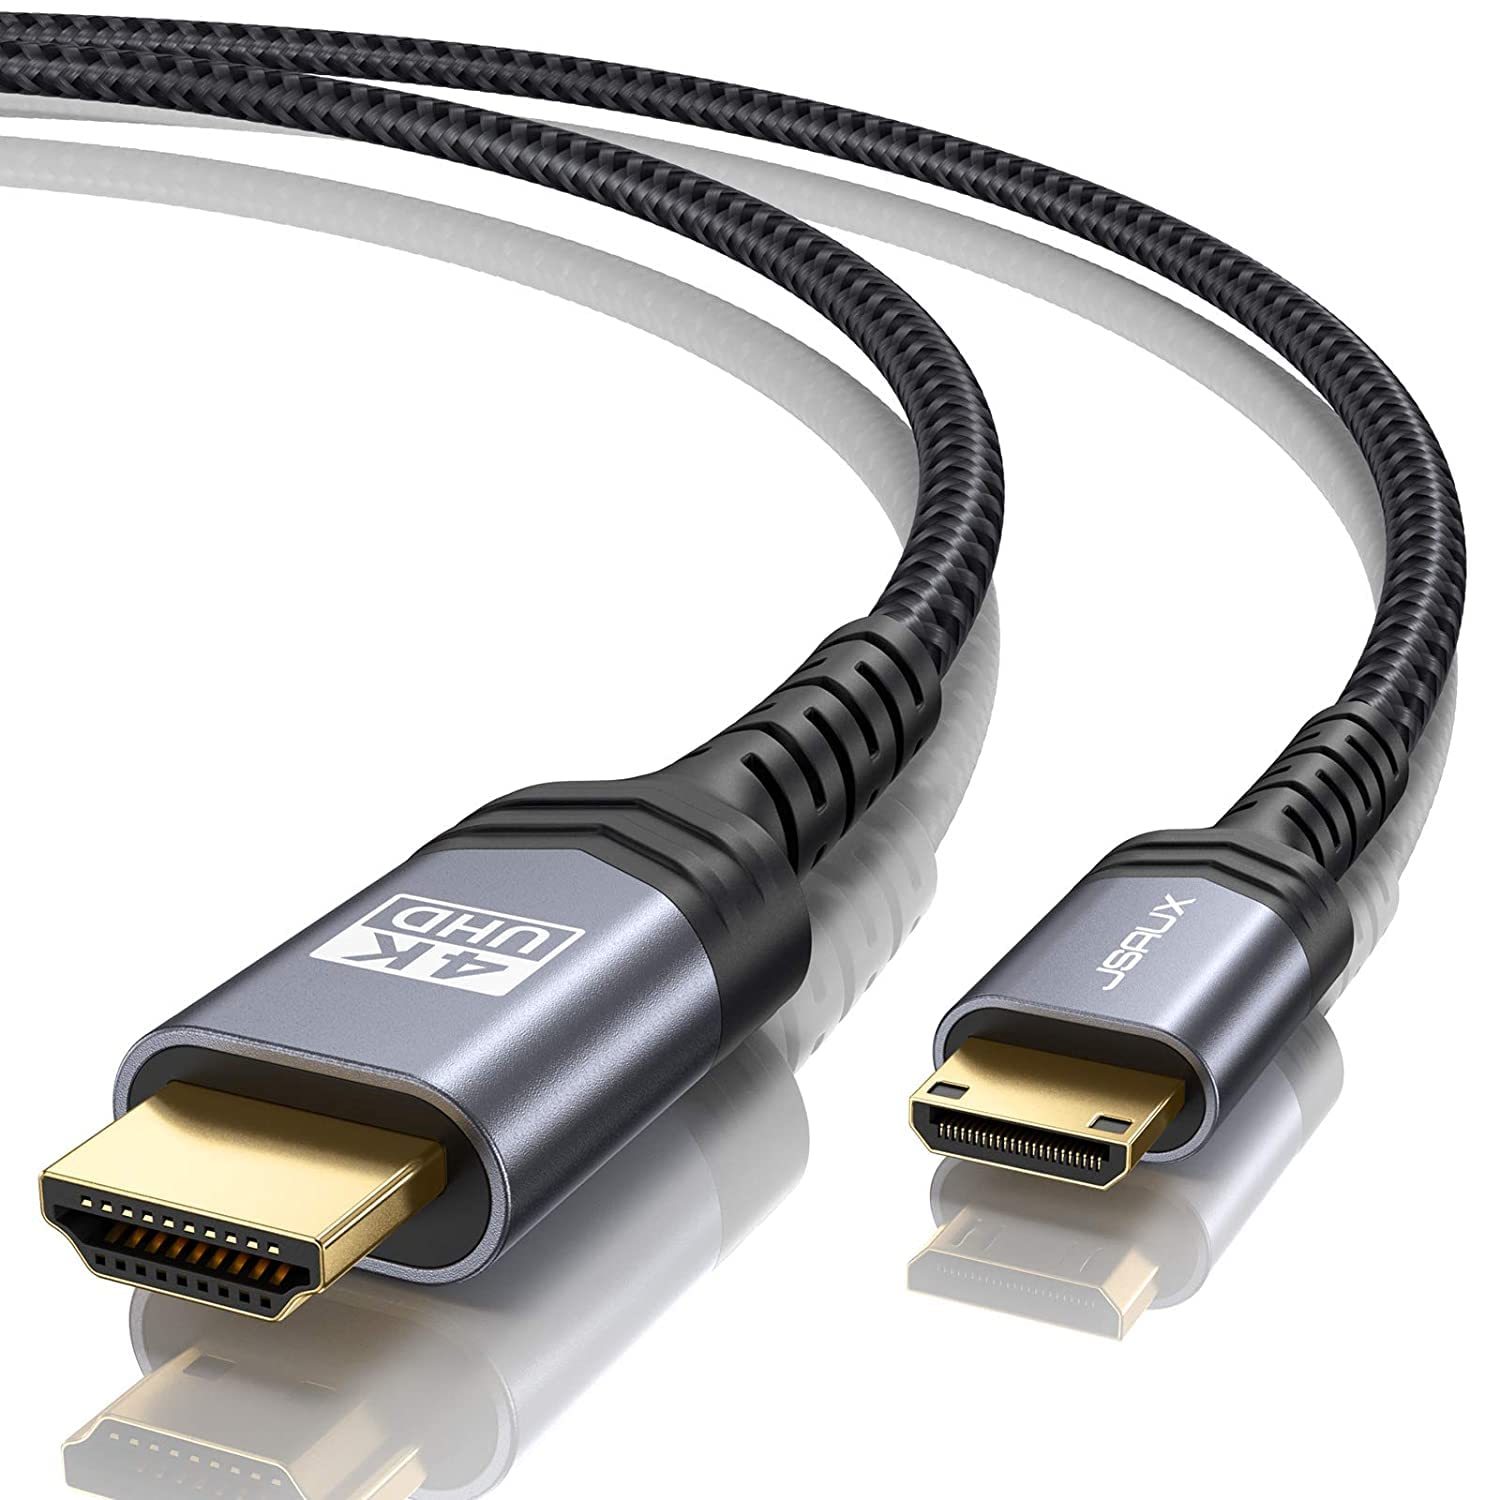 Mini HDMI to HDMI Cable 6ft, [Aluminum Shell, Braided] High Speed 4K 60Hz HDMI 2